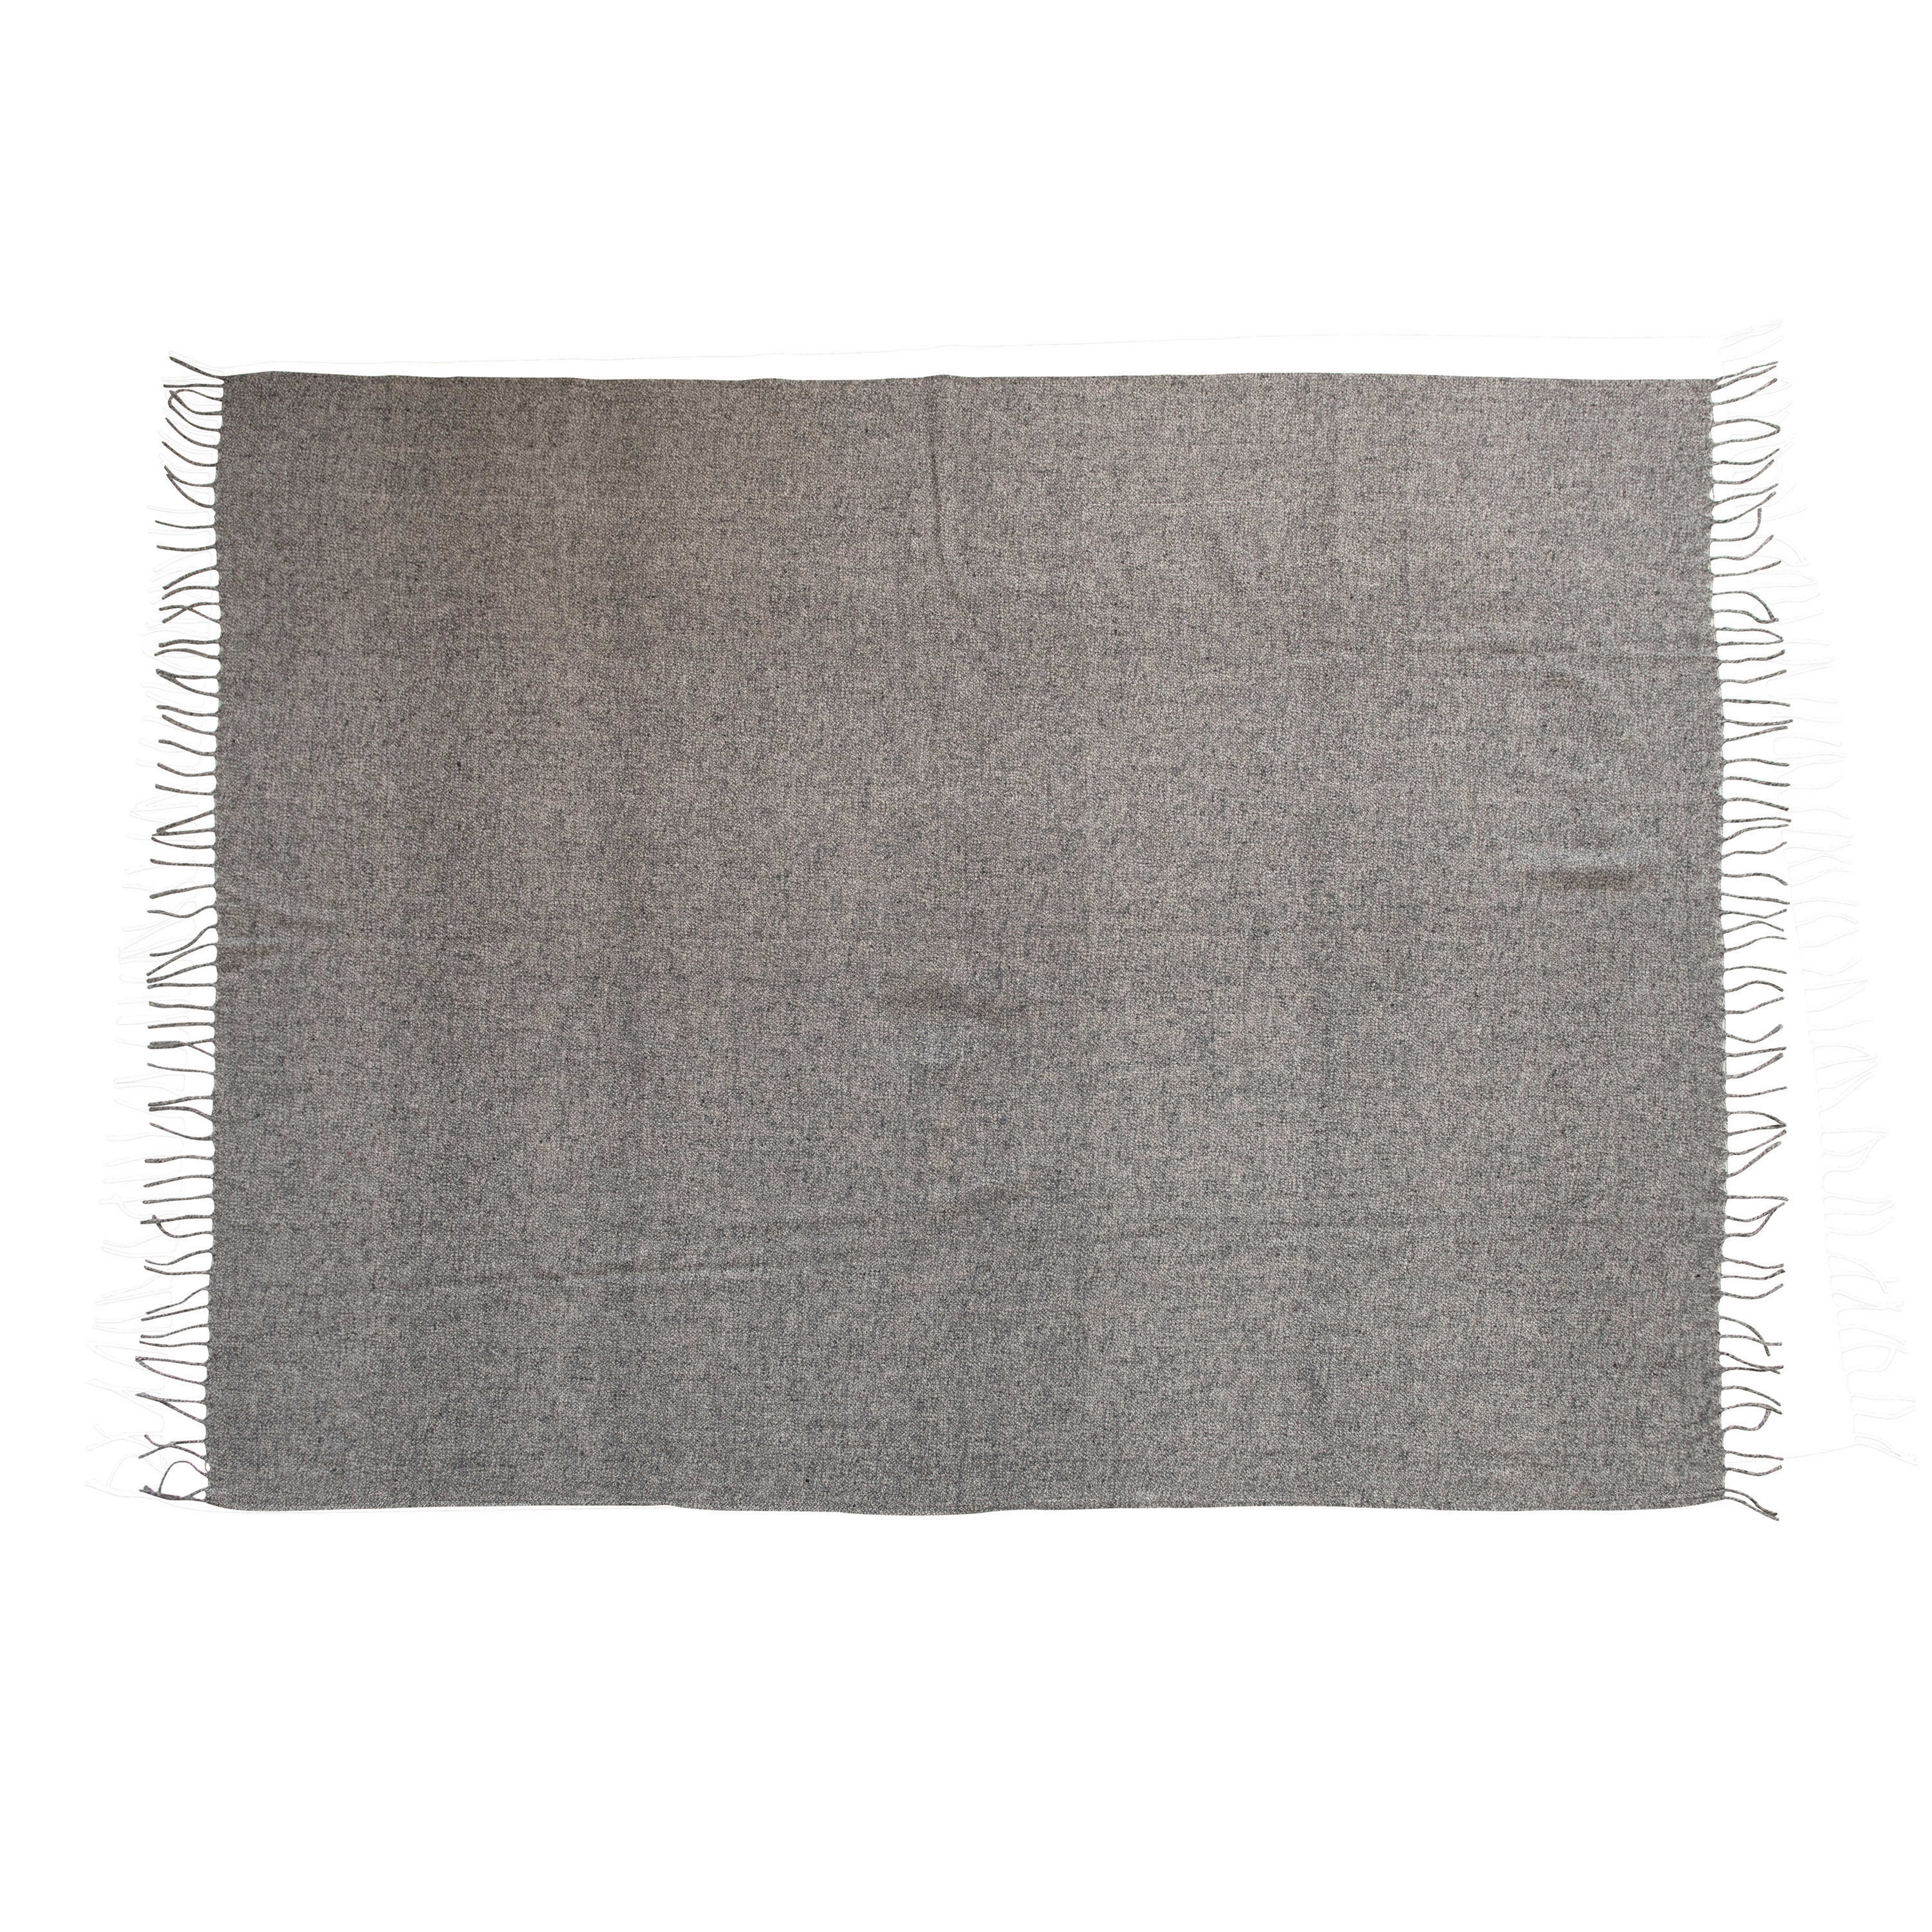 Wool Blend Throw with Fringe, Grey - Nomad Home